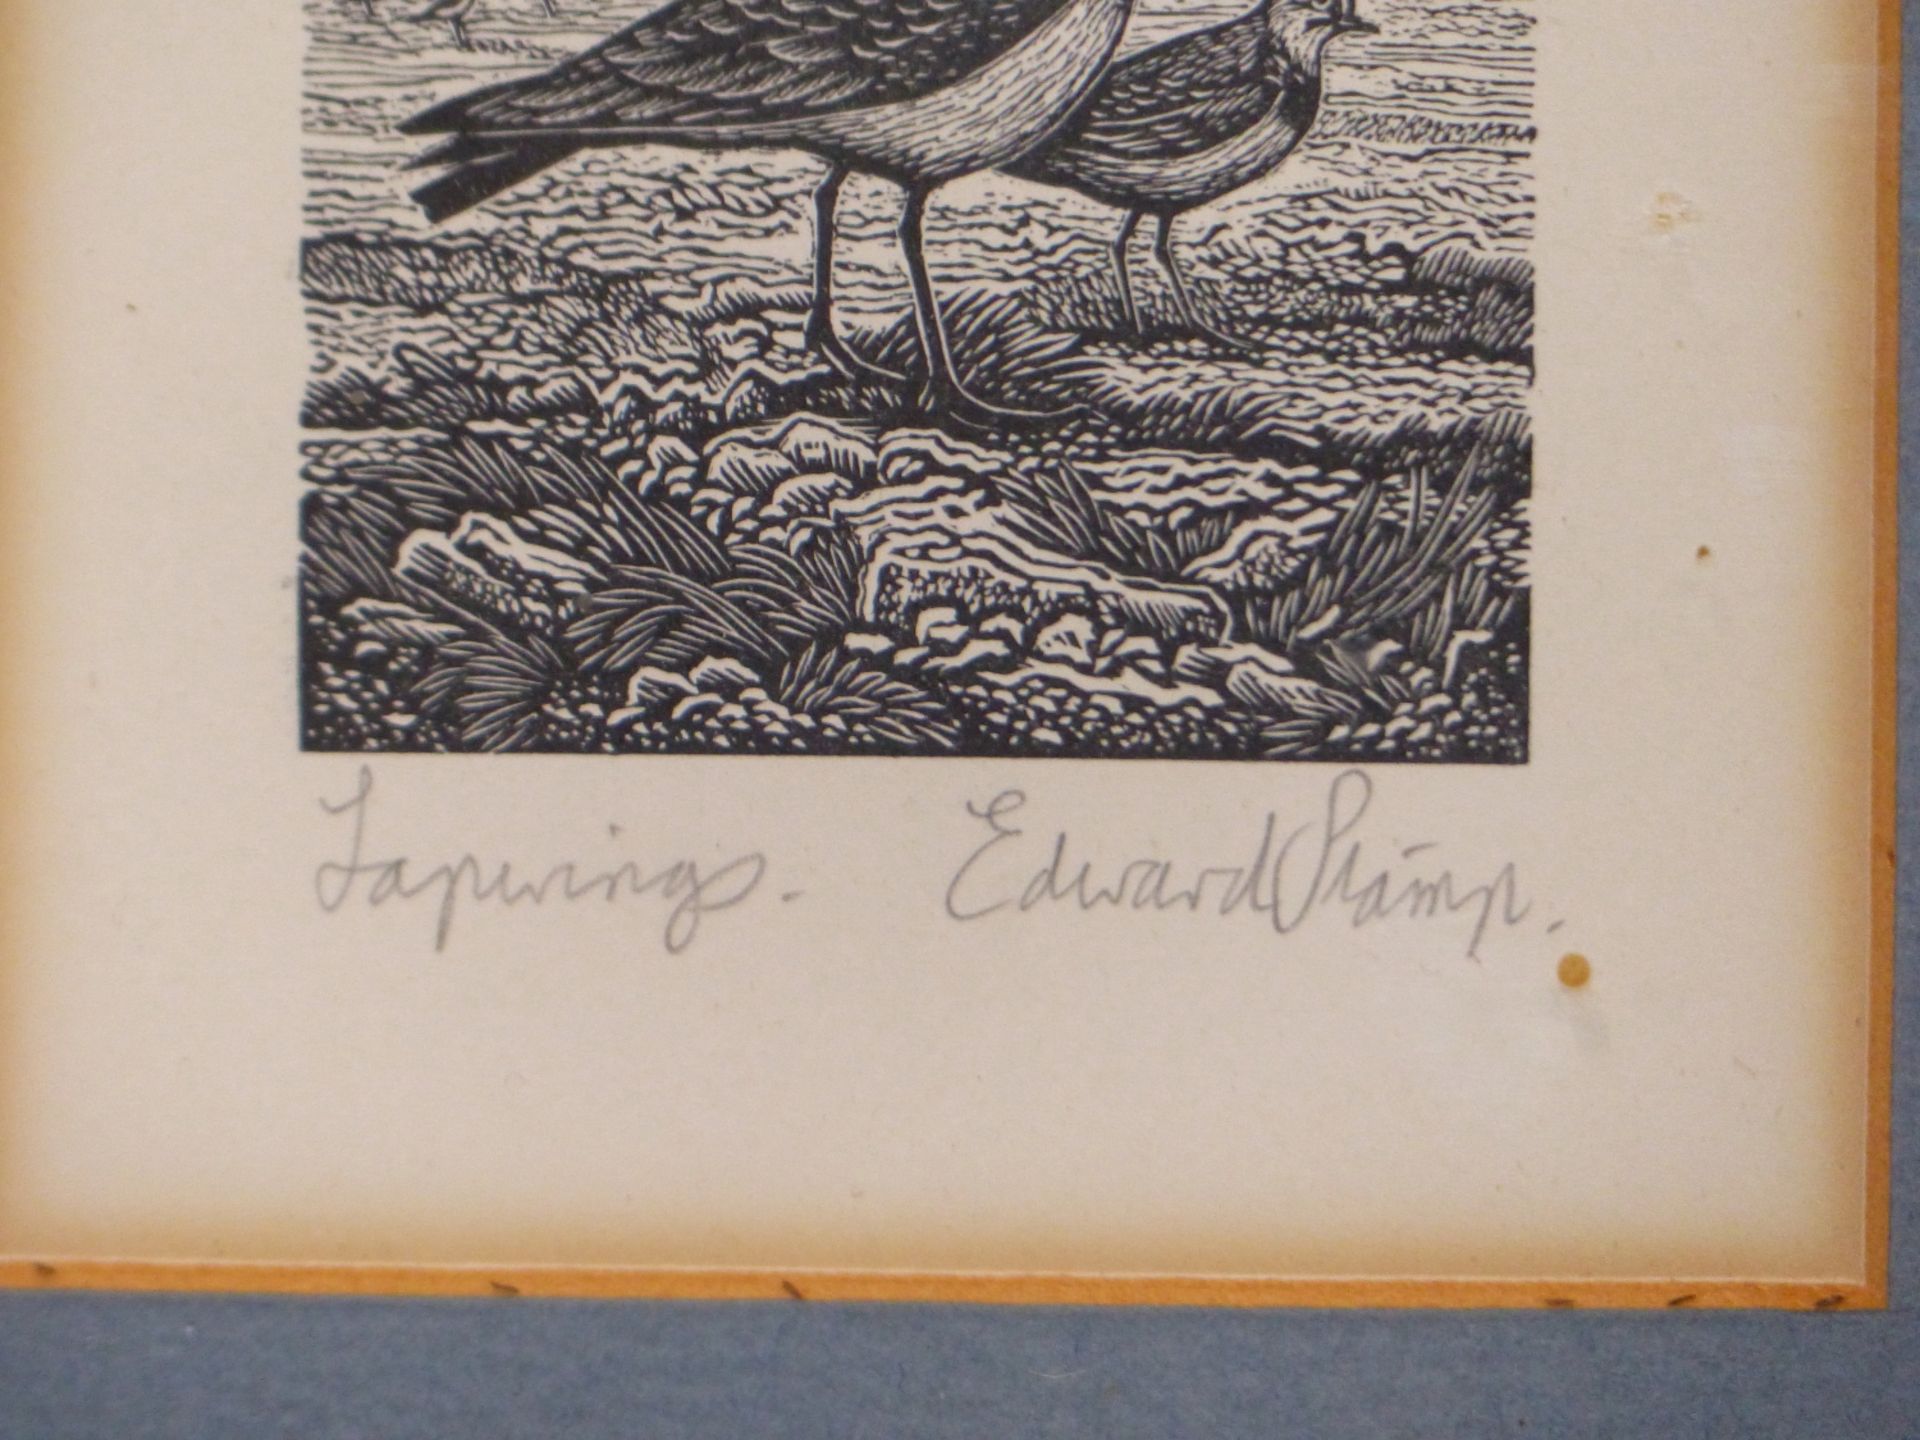 EDWARD STAMP ( 20TH C) ARR. LAPWINGS, WOODCUT PRINT. PENCIL SIGNED AND TITLED. 5.2 X 7.8 cm - Image 3 of 5